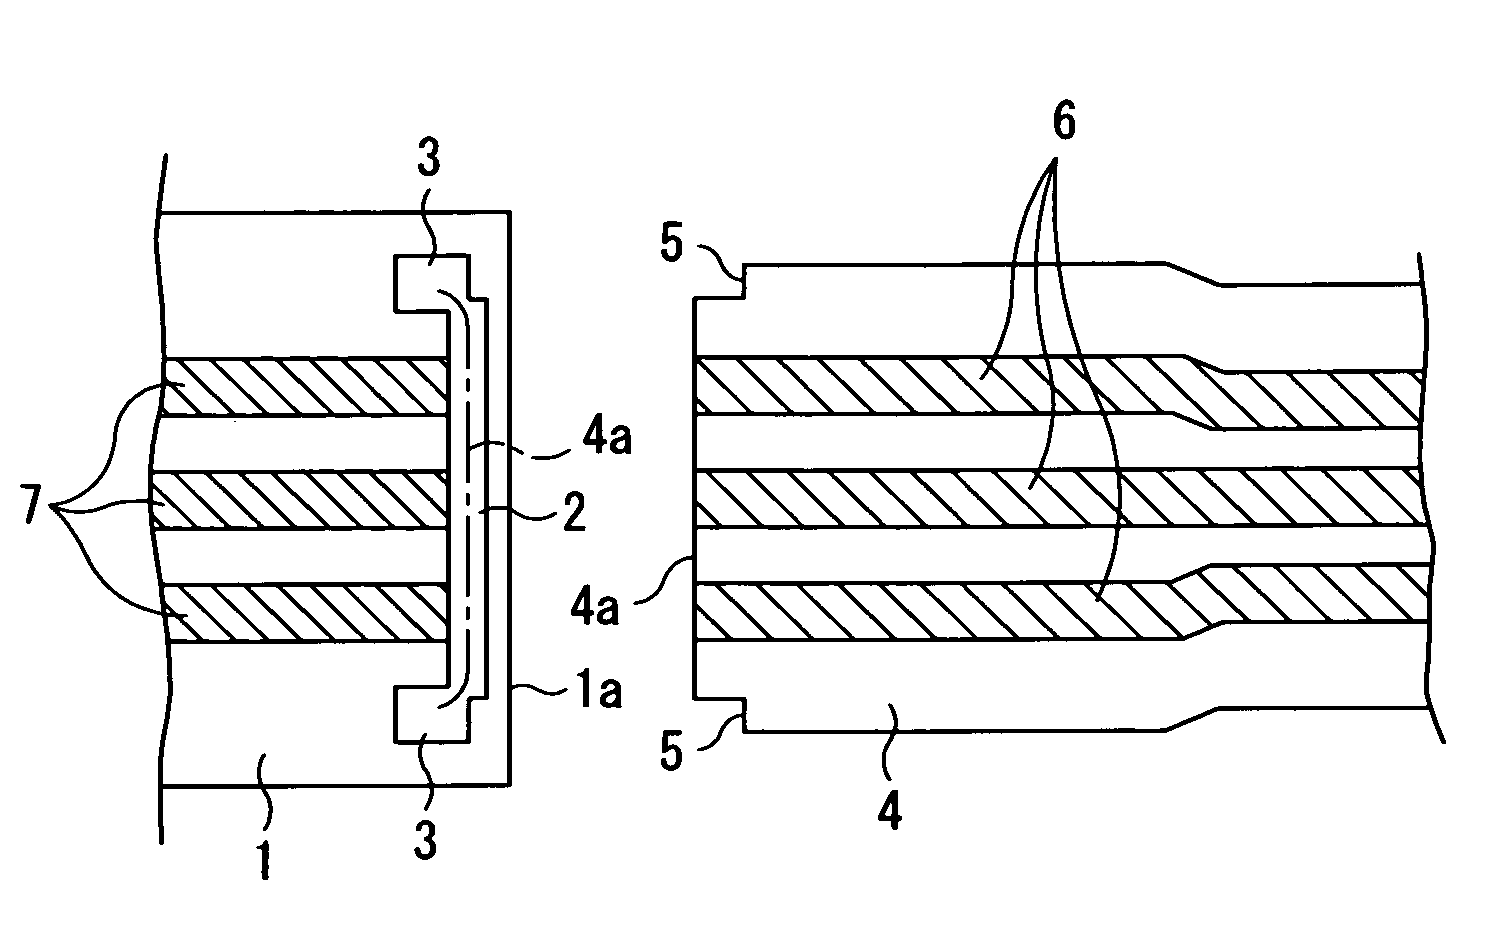 Connecting structure of flexible printed circuit board to printed circuit board